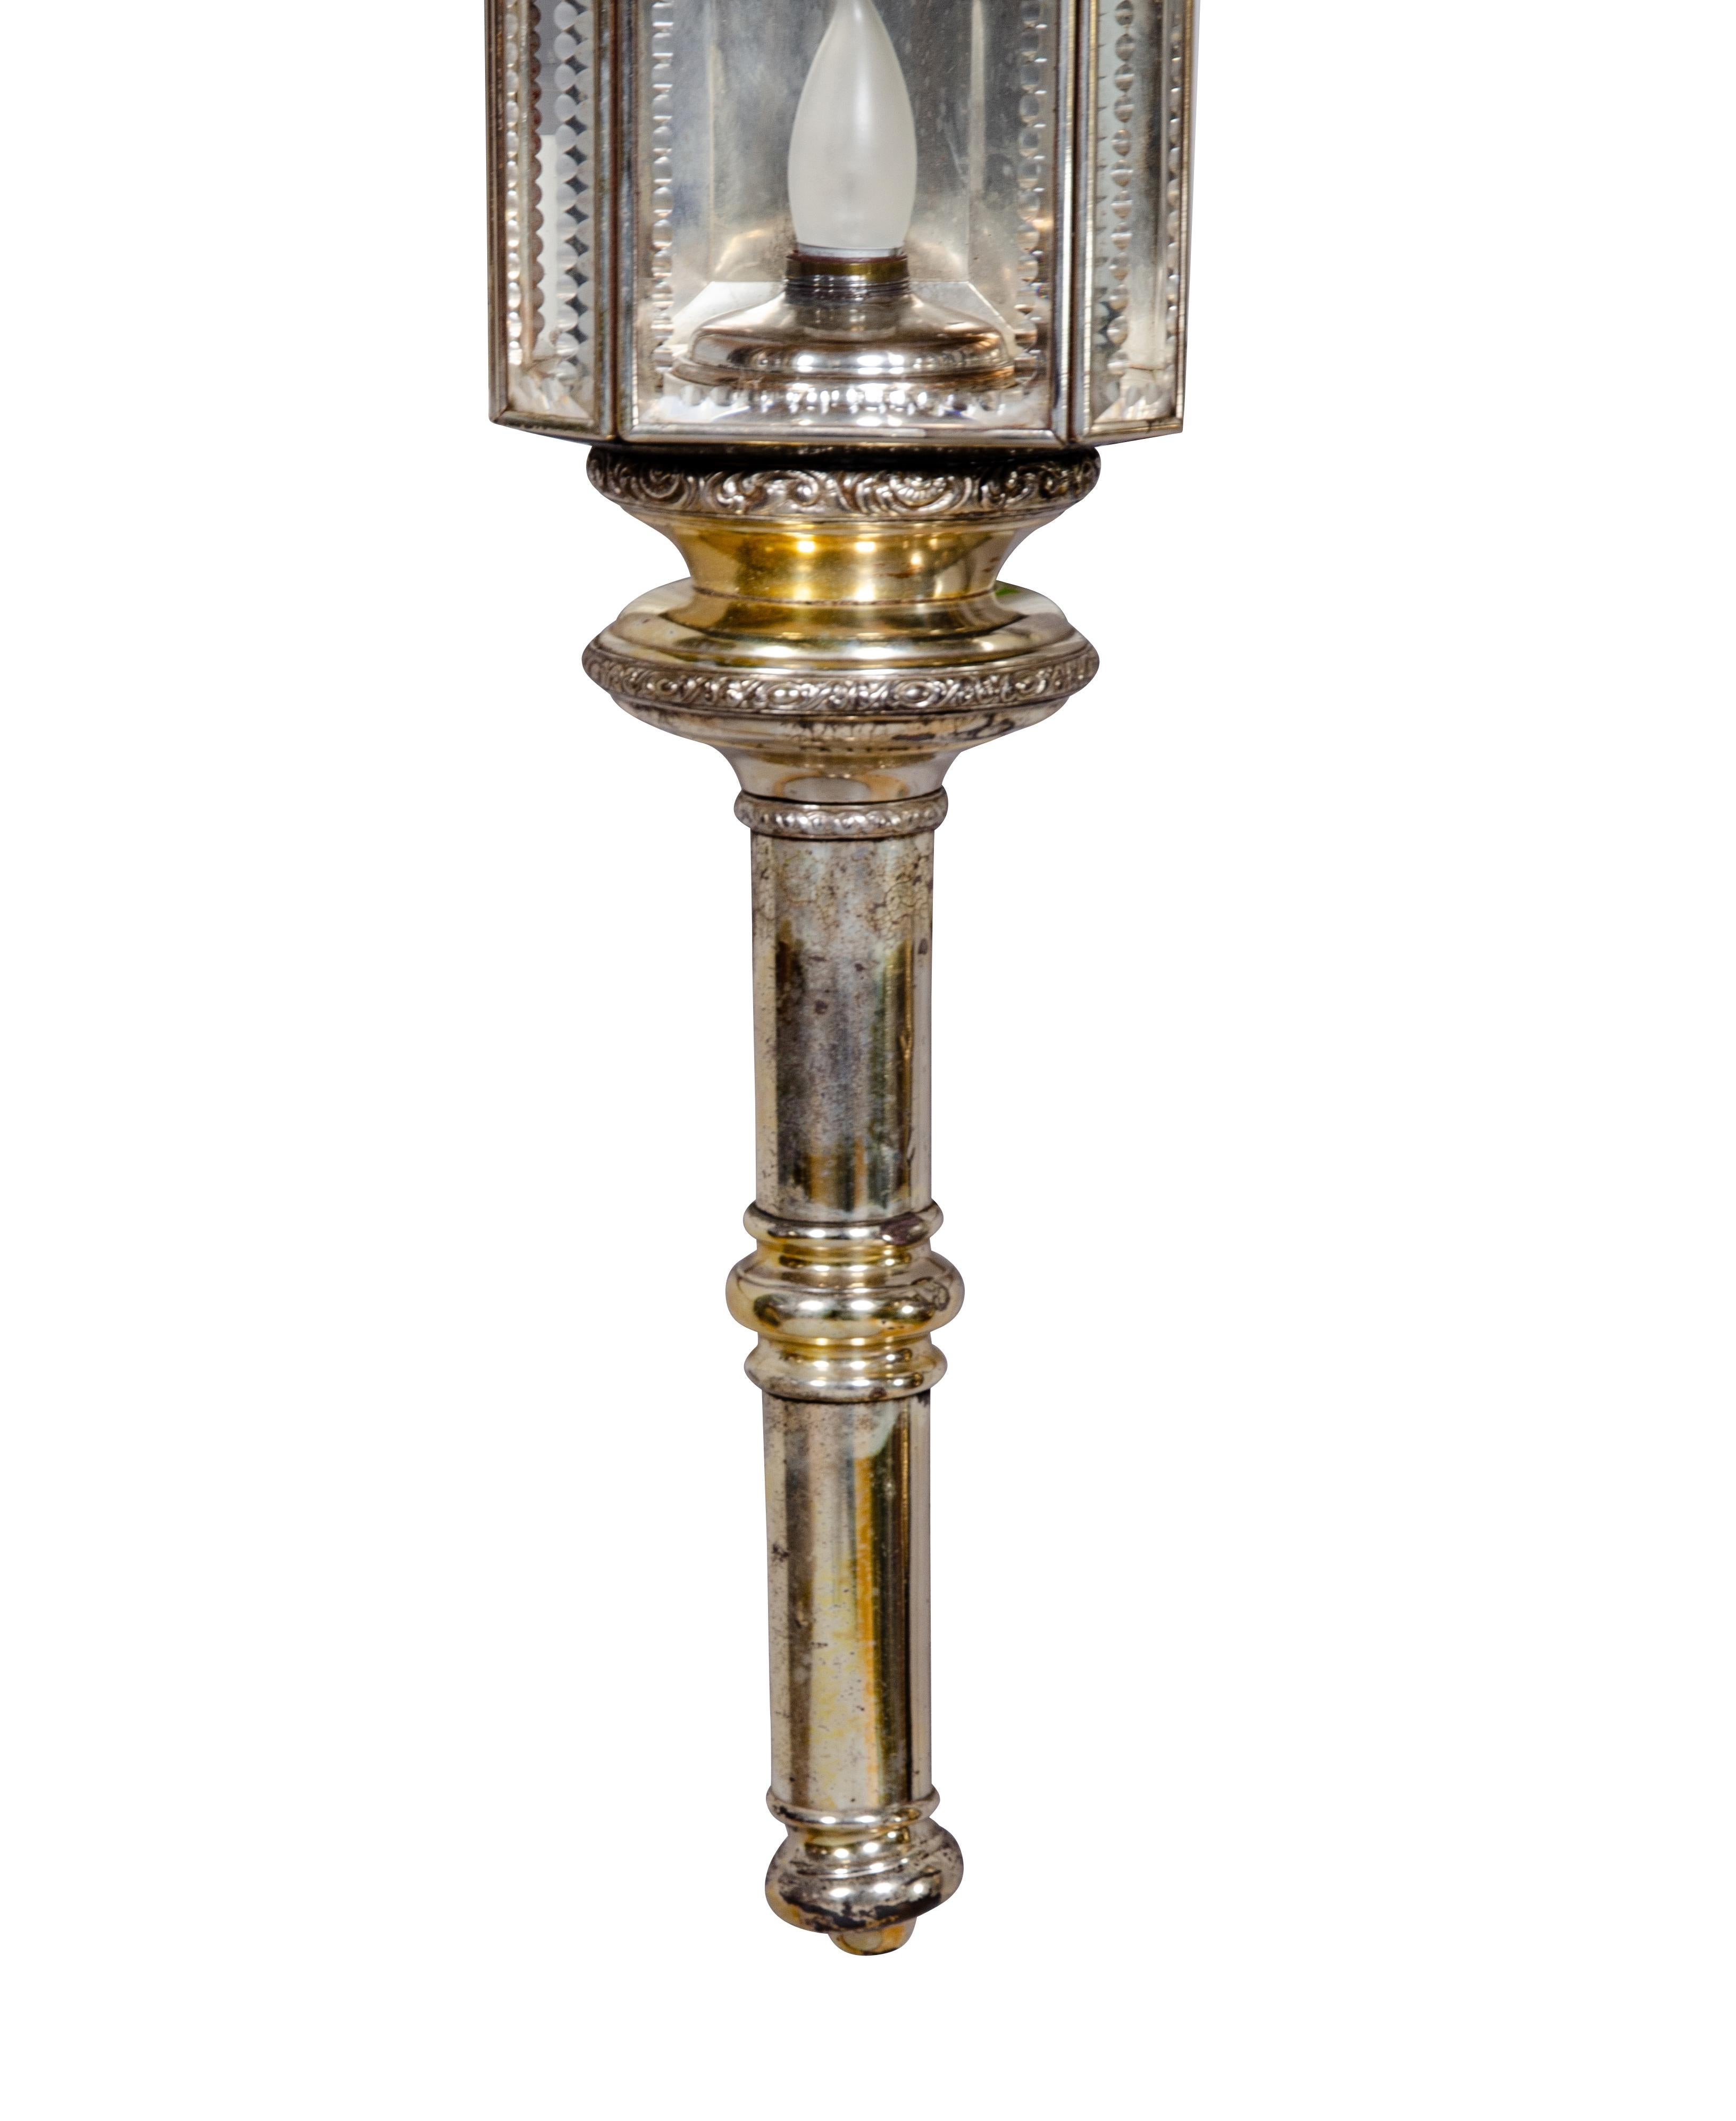 Electrified and includes wall mount. Typical form with beveled glass lantern.Originally mounted on a horse and carriage,